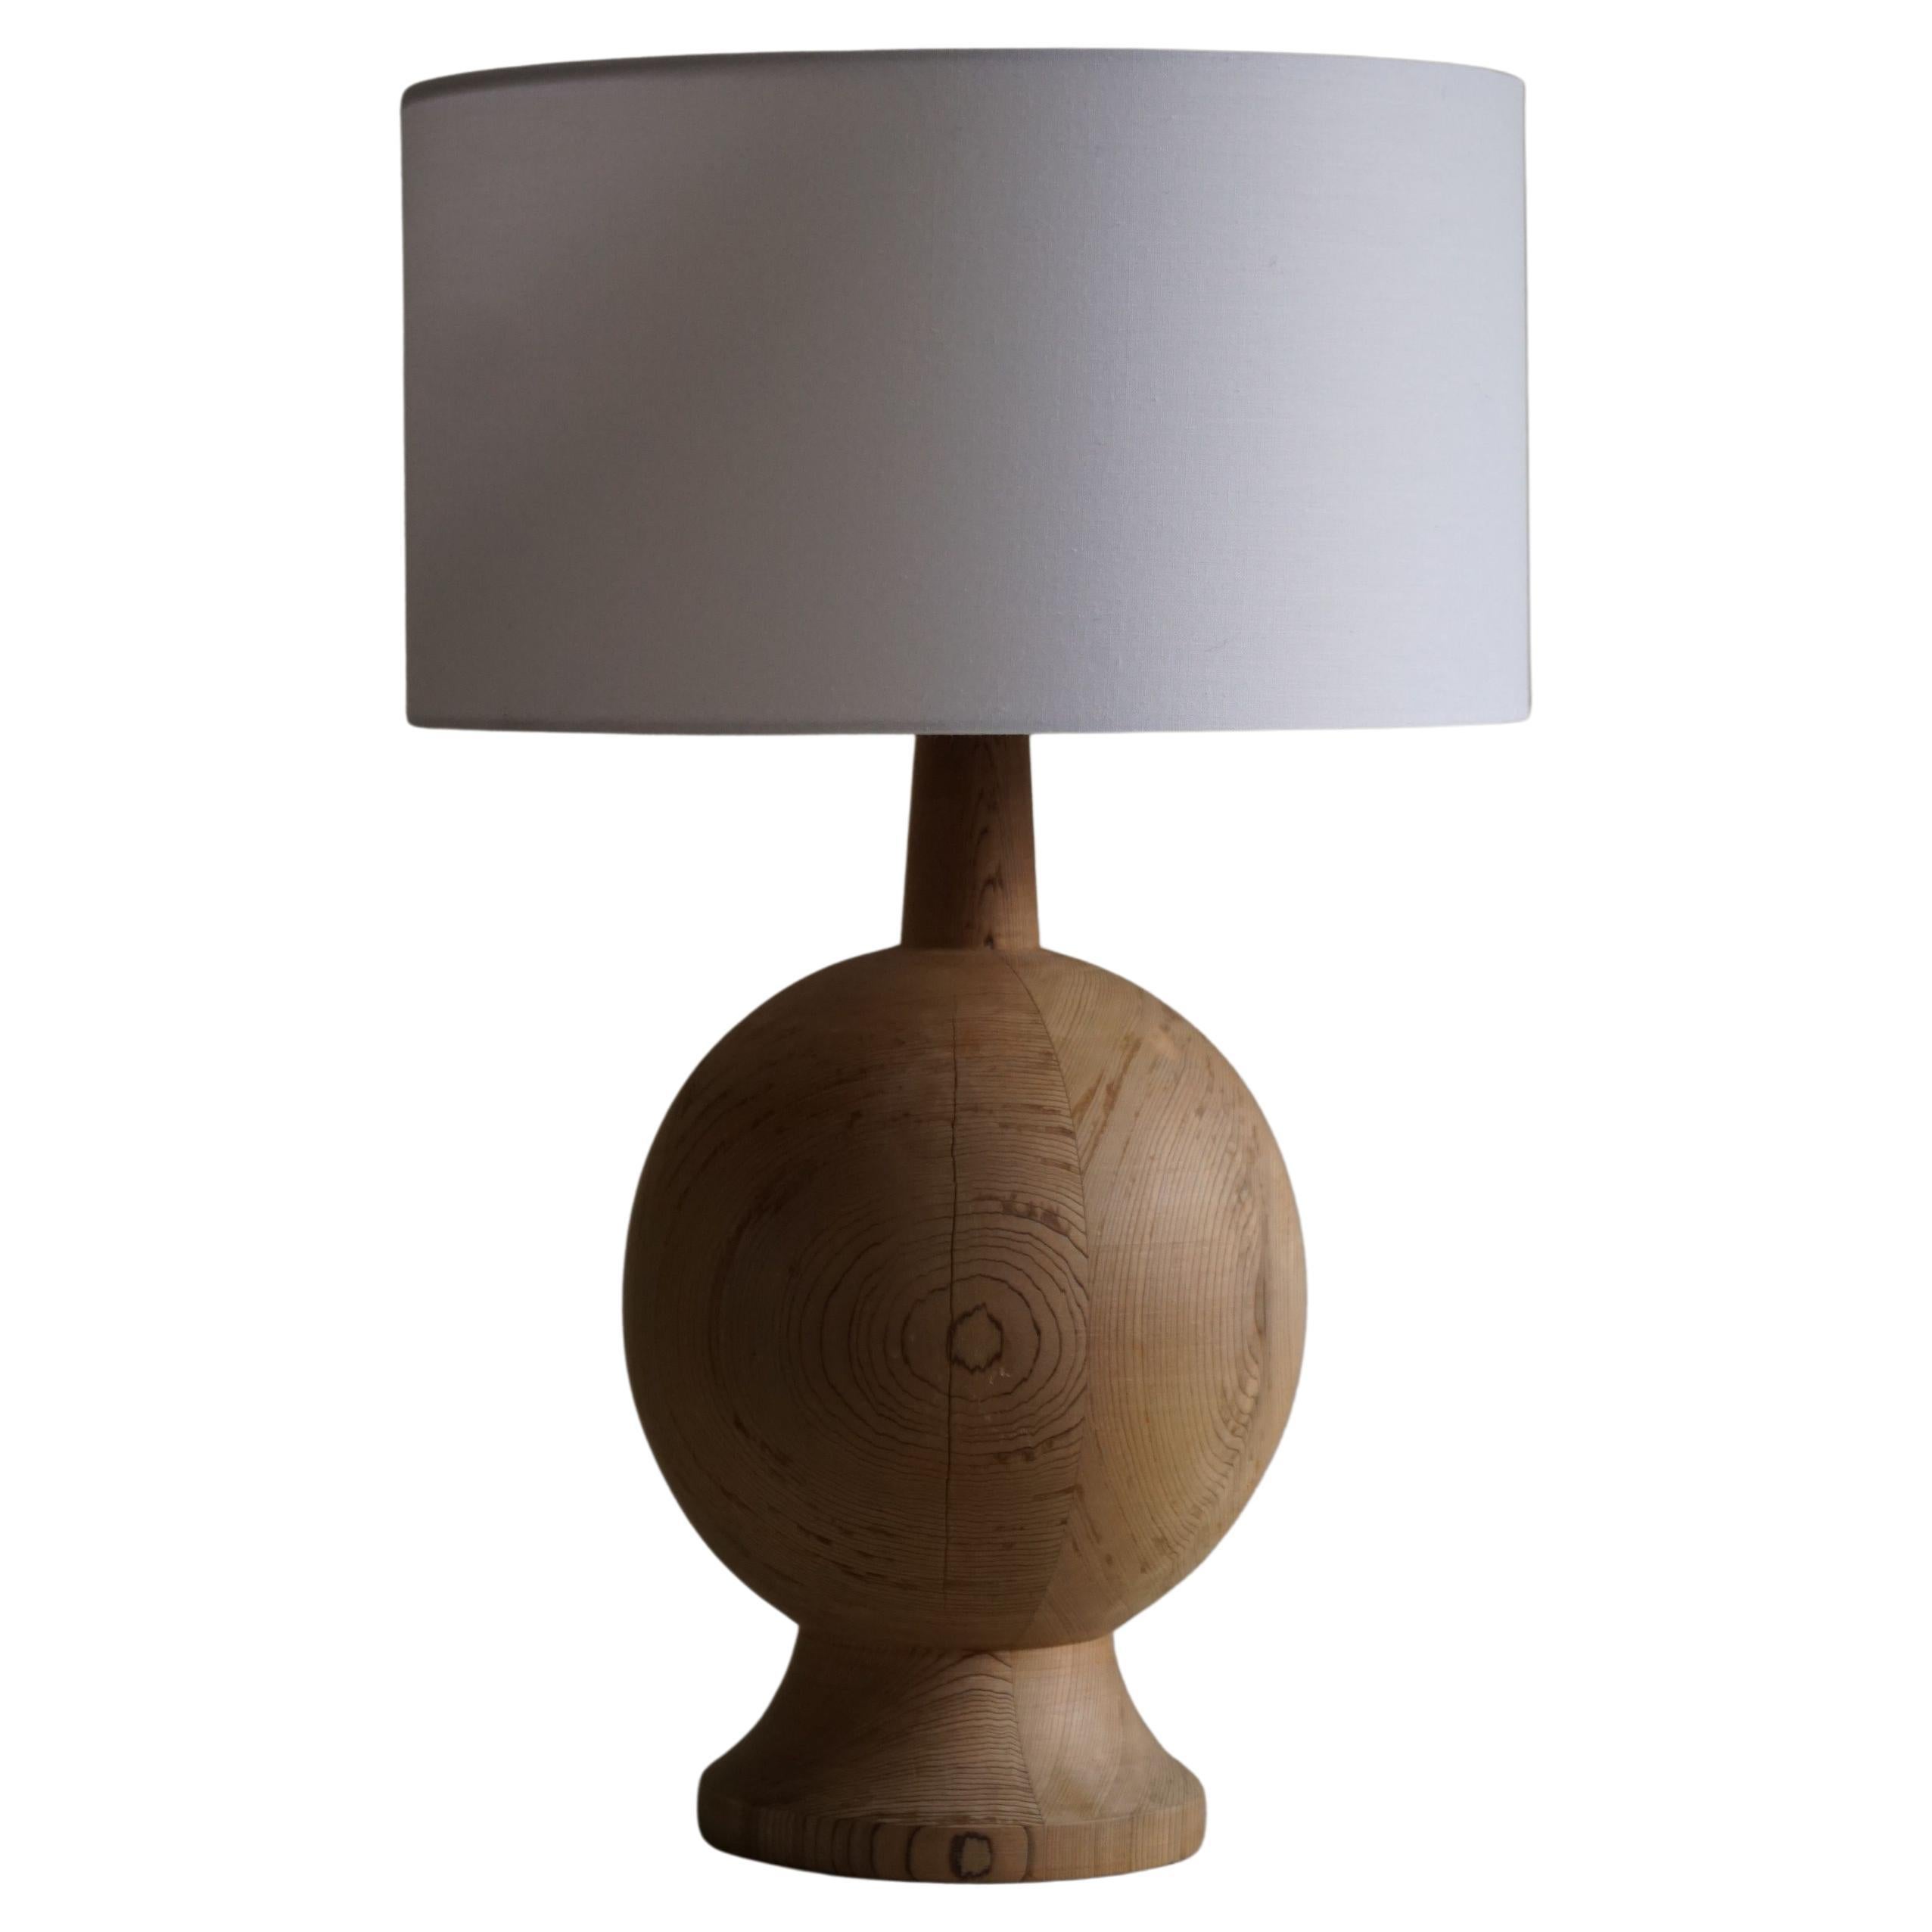 Danish Mid Century Modern, A Round Wooden Table Lamp in Solid Pine, 1960s For Sale